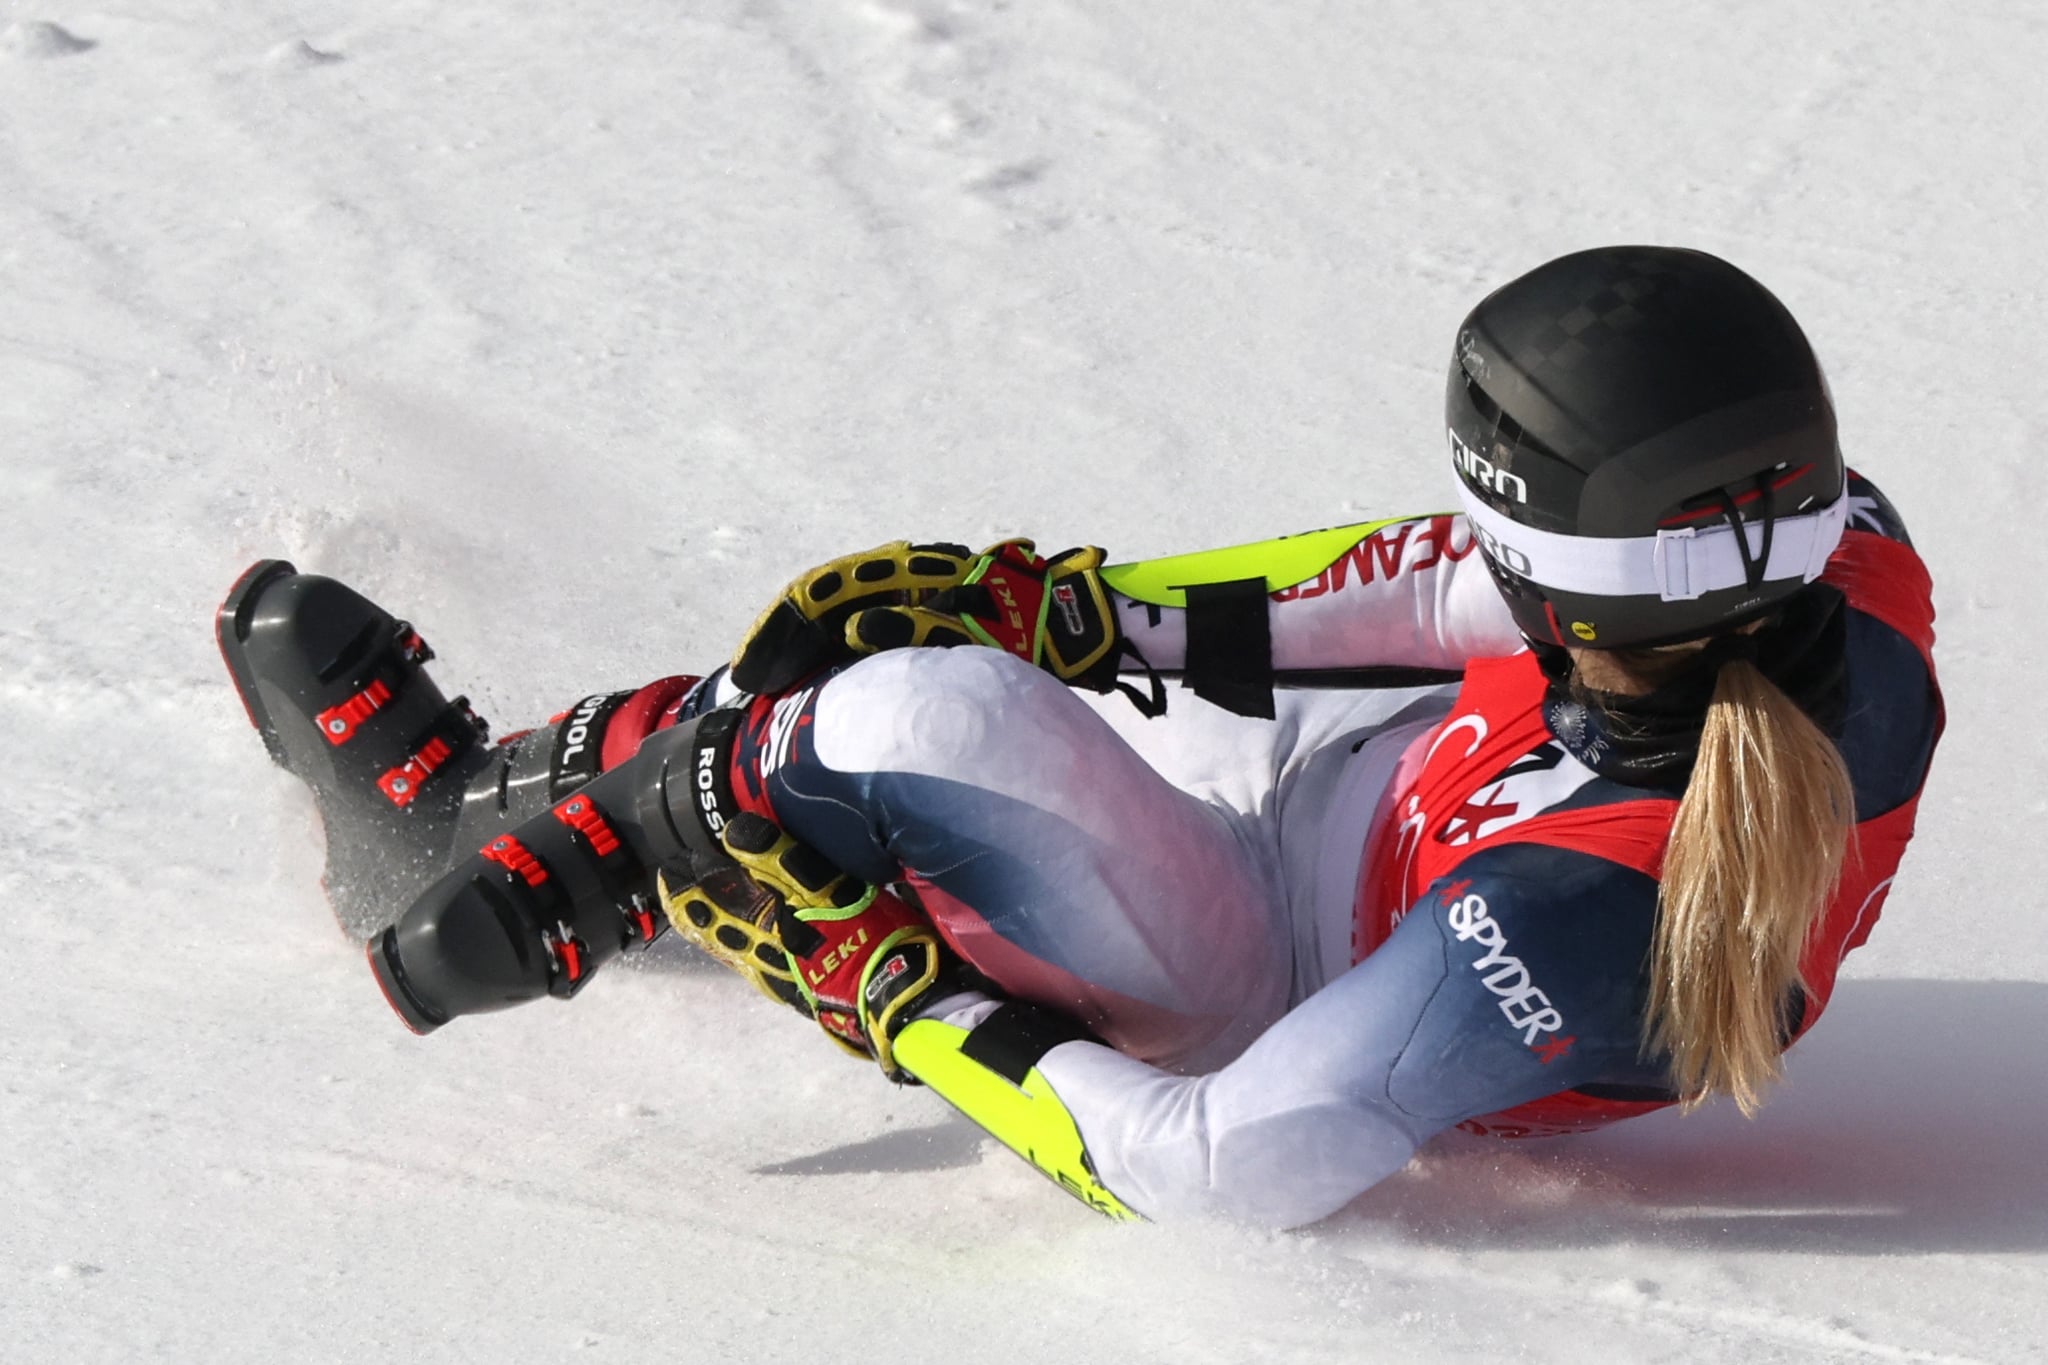 USA's Nina O'Brien crashed after the second run of the women's giant slalom during the Beijing 2022 Winter Olympic Games at the Yanqing National Alpine Skiing Centre in Yanqing on February 7, 2022. (Photo by Dimitar DILKOFF / AFP) (Photo by DIMITAR DILKOFF/AFP via Getty Images)